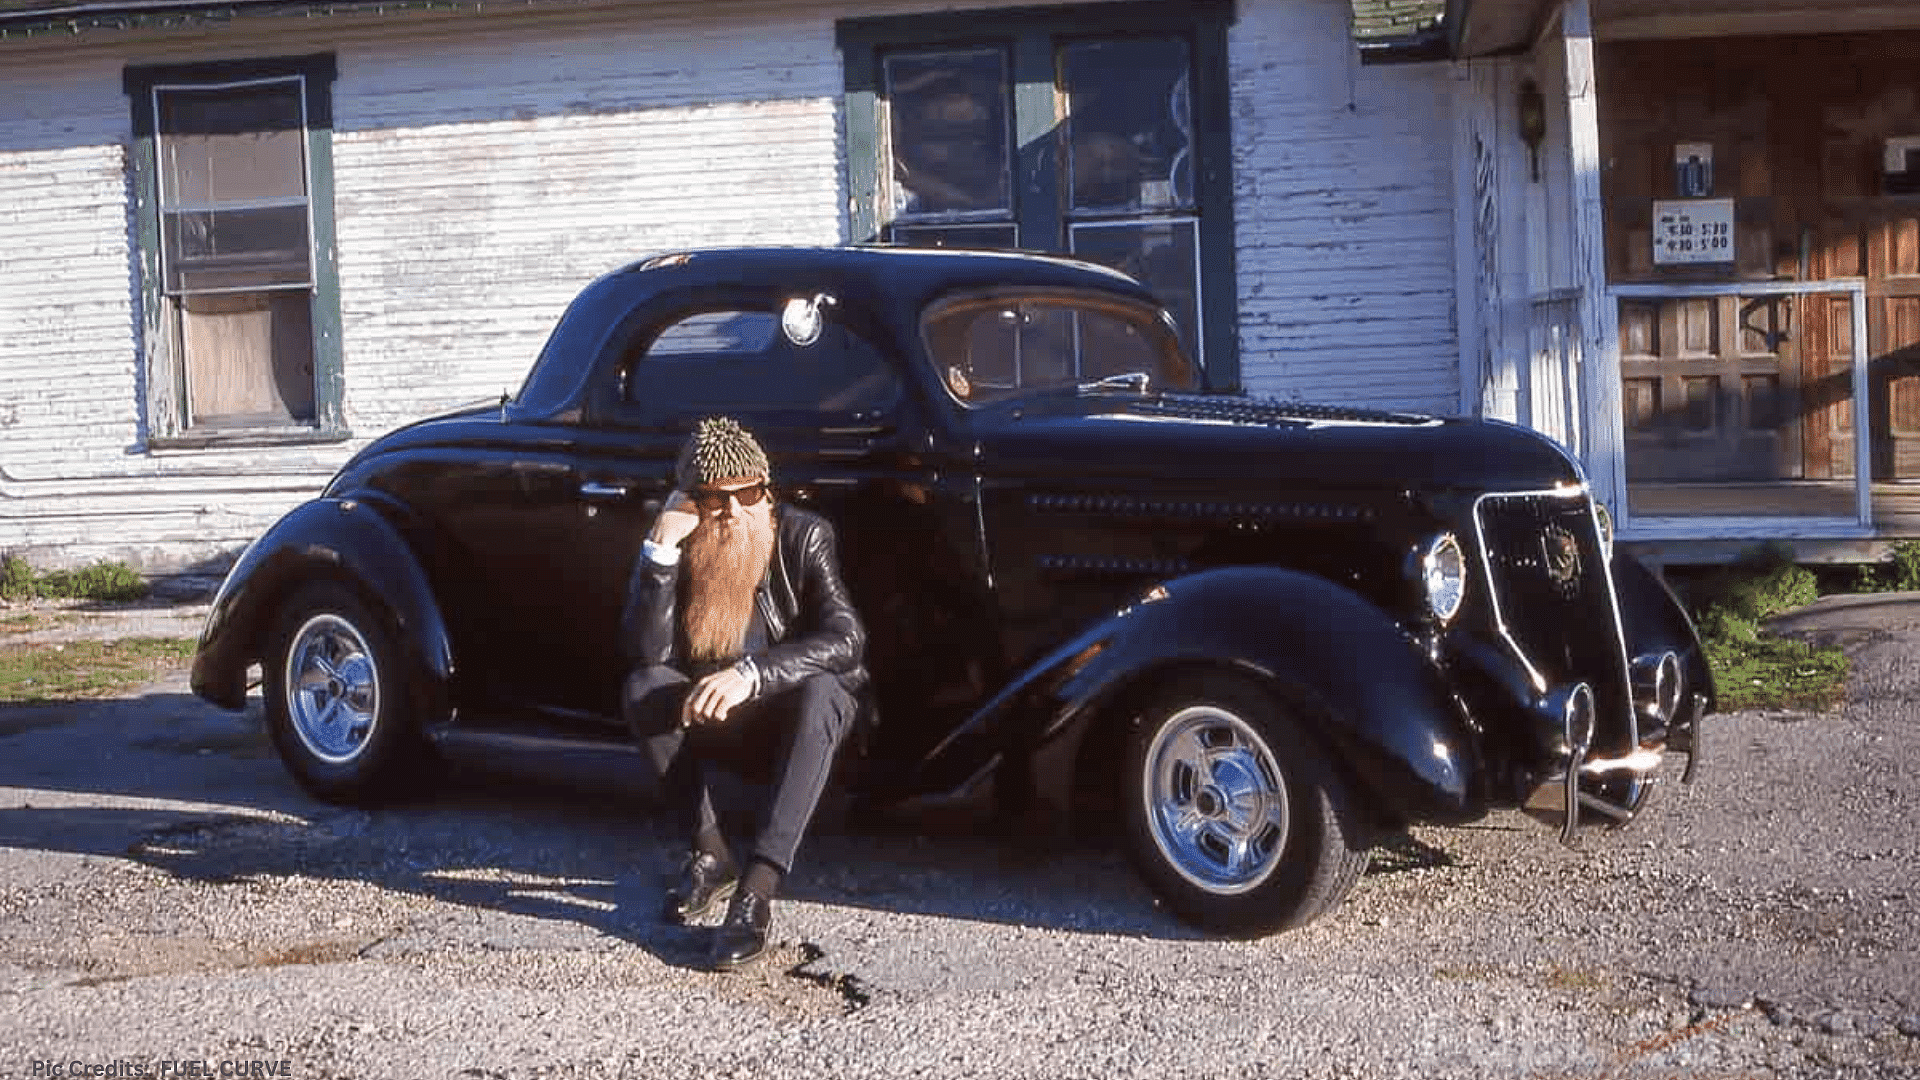 Billy F. Gibbons 1936 Ford Coupe a.k.a. 'Mambo'